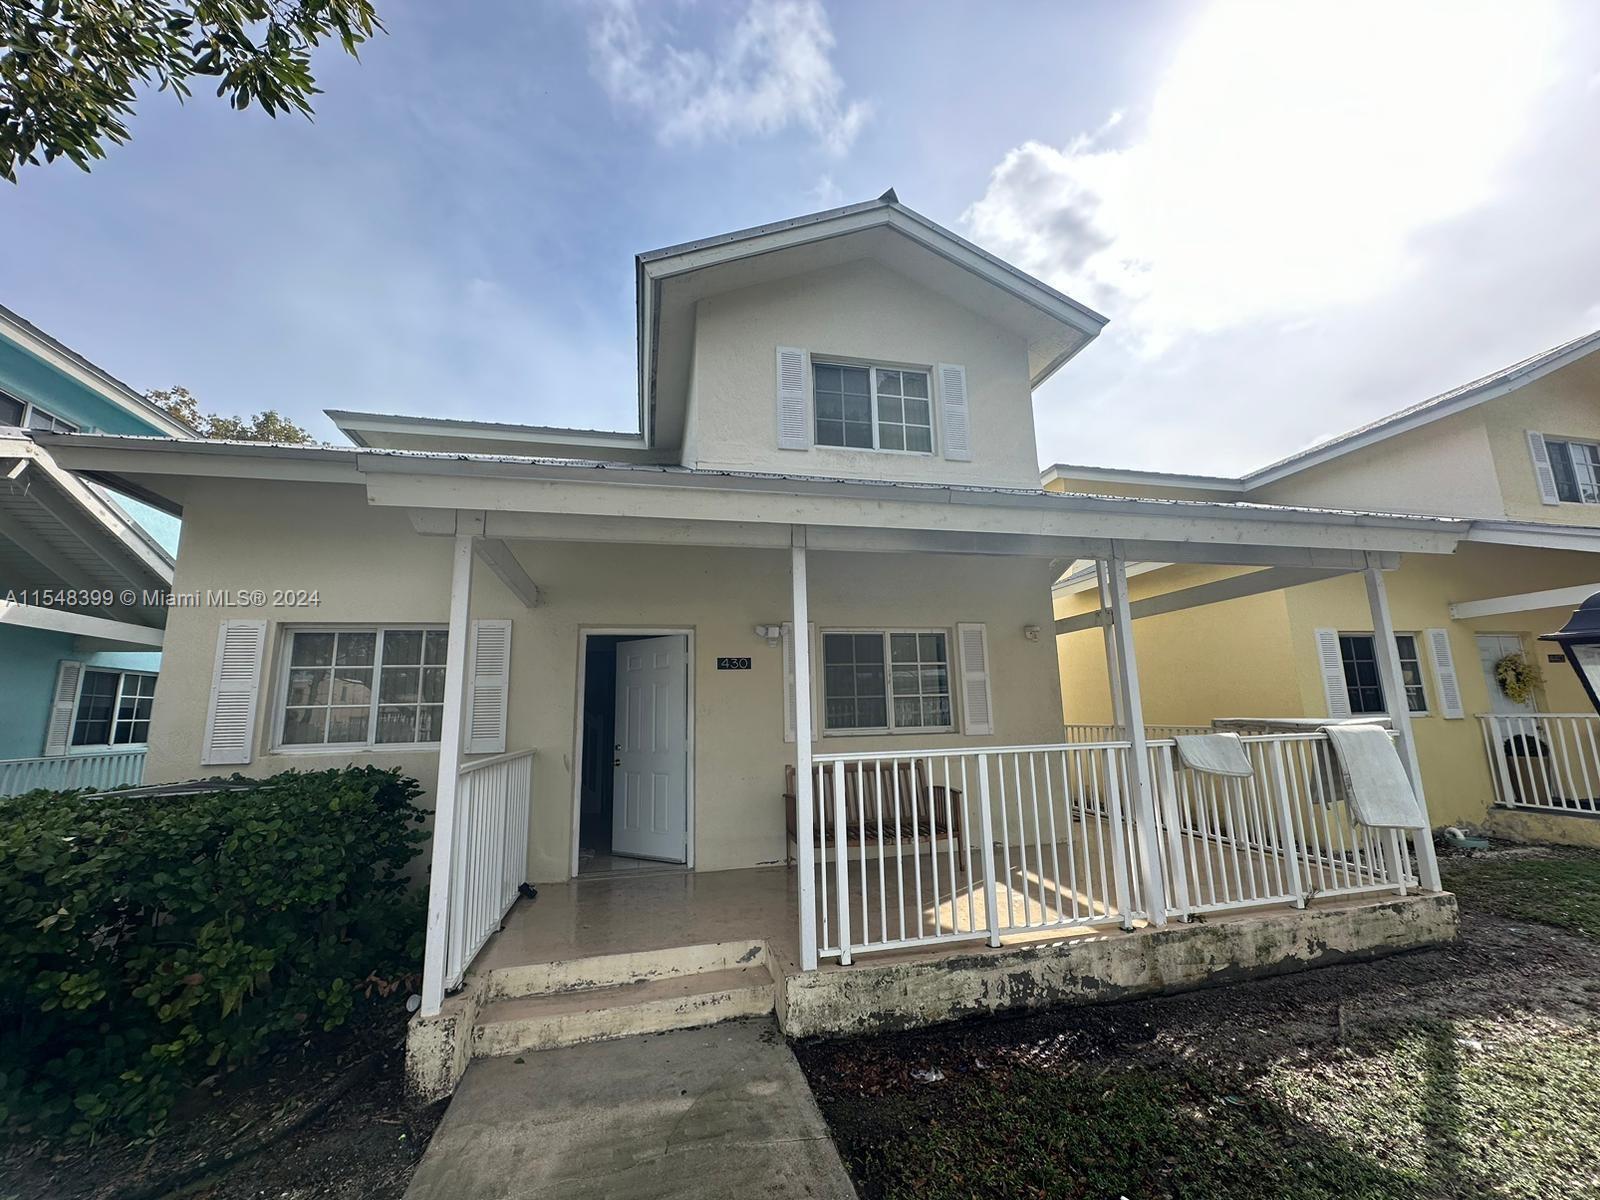 Photo of 430 NW 20th St in Miami, FL